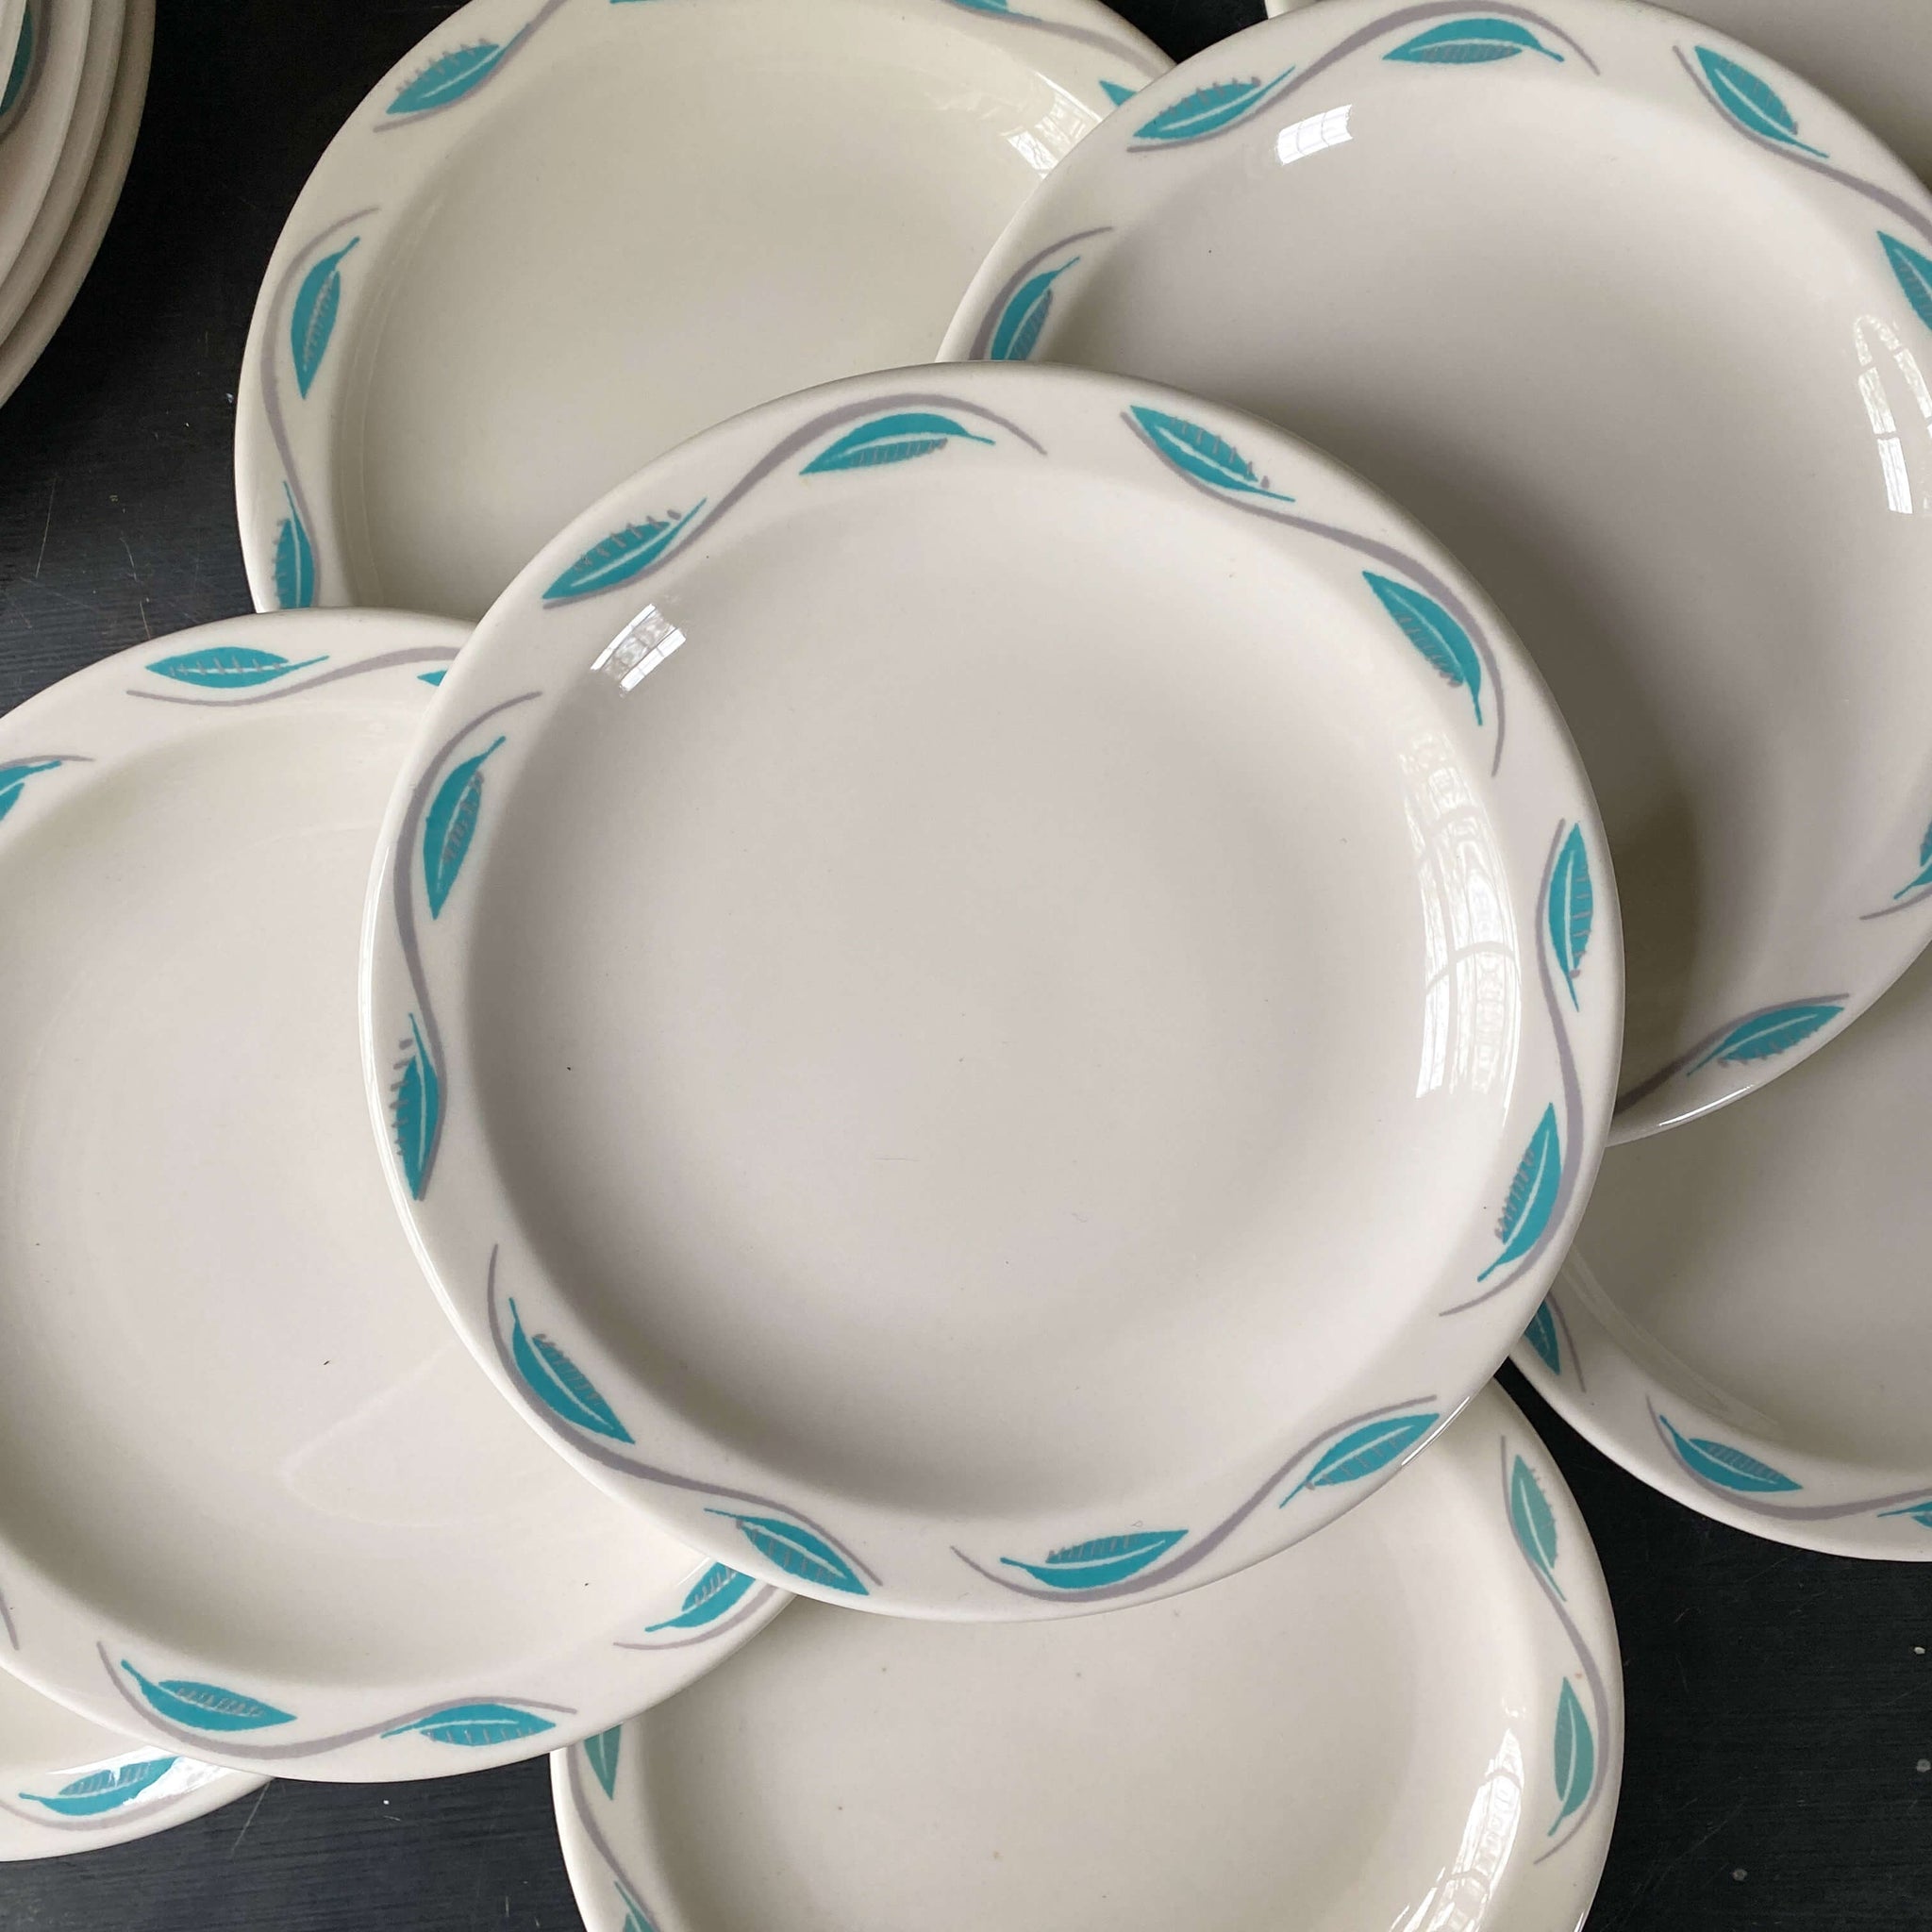 Vintage Homer Laughlin Turquoise Leaf Restaurant Ware Plates and Cups circa 1960s-1980s